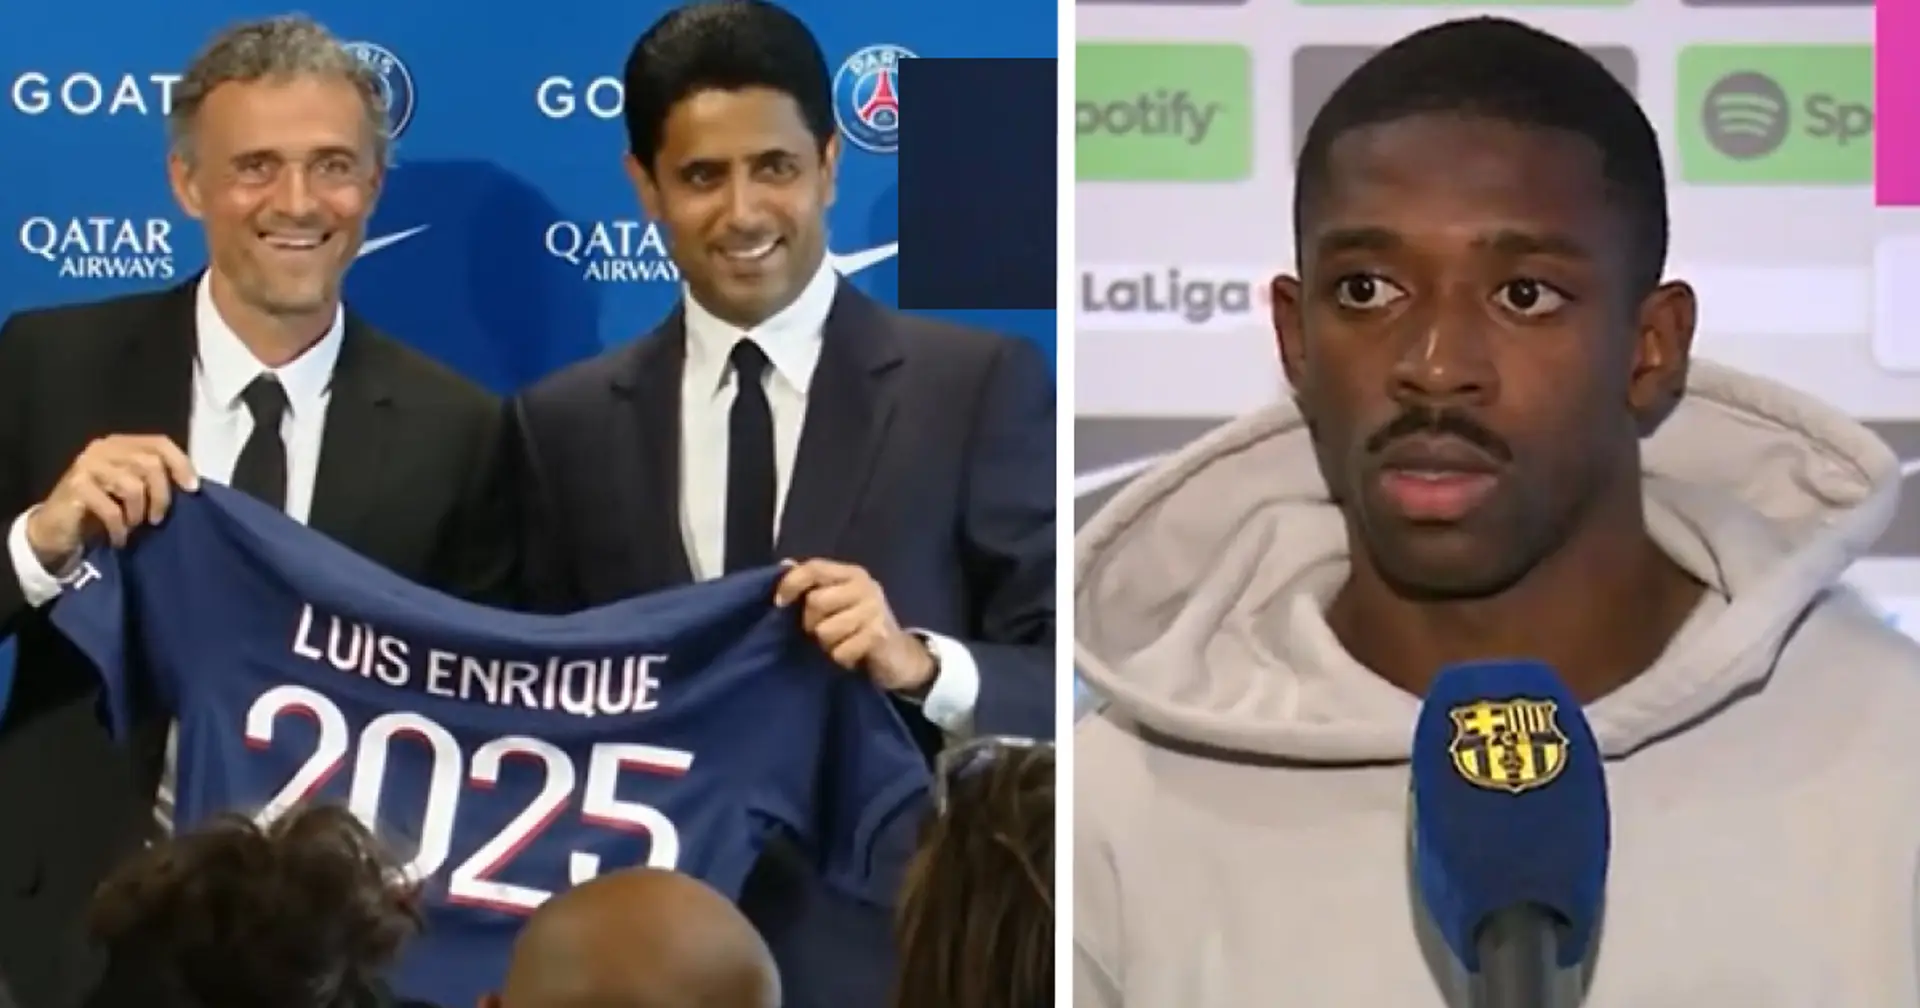 PSG already signed one Barca player before going all out for Dembele